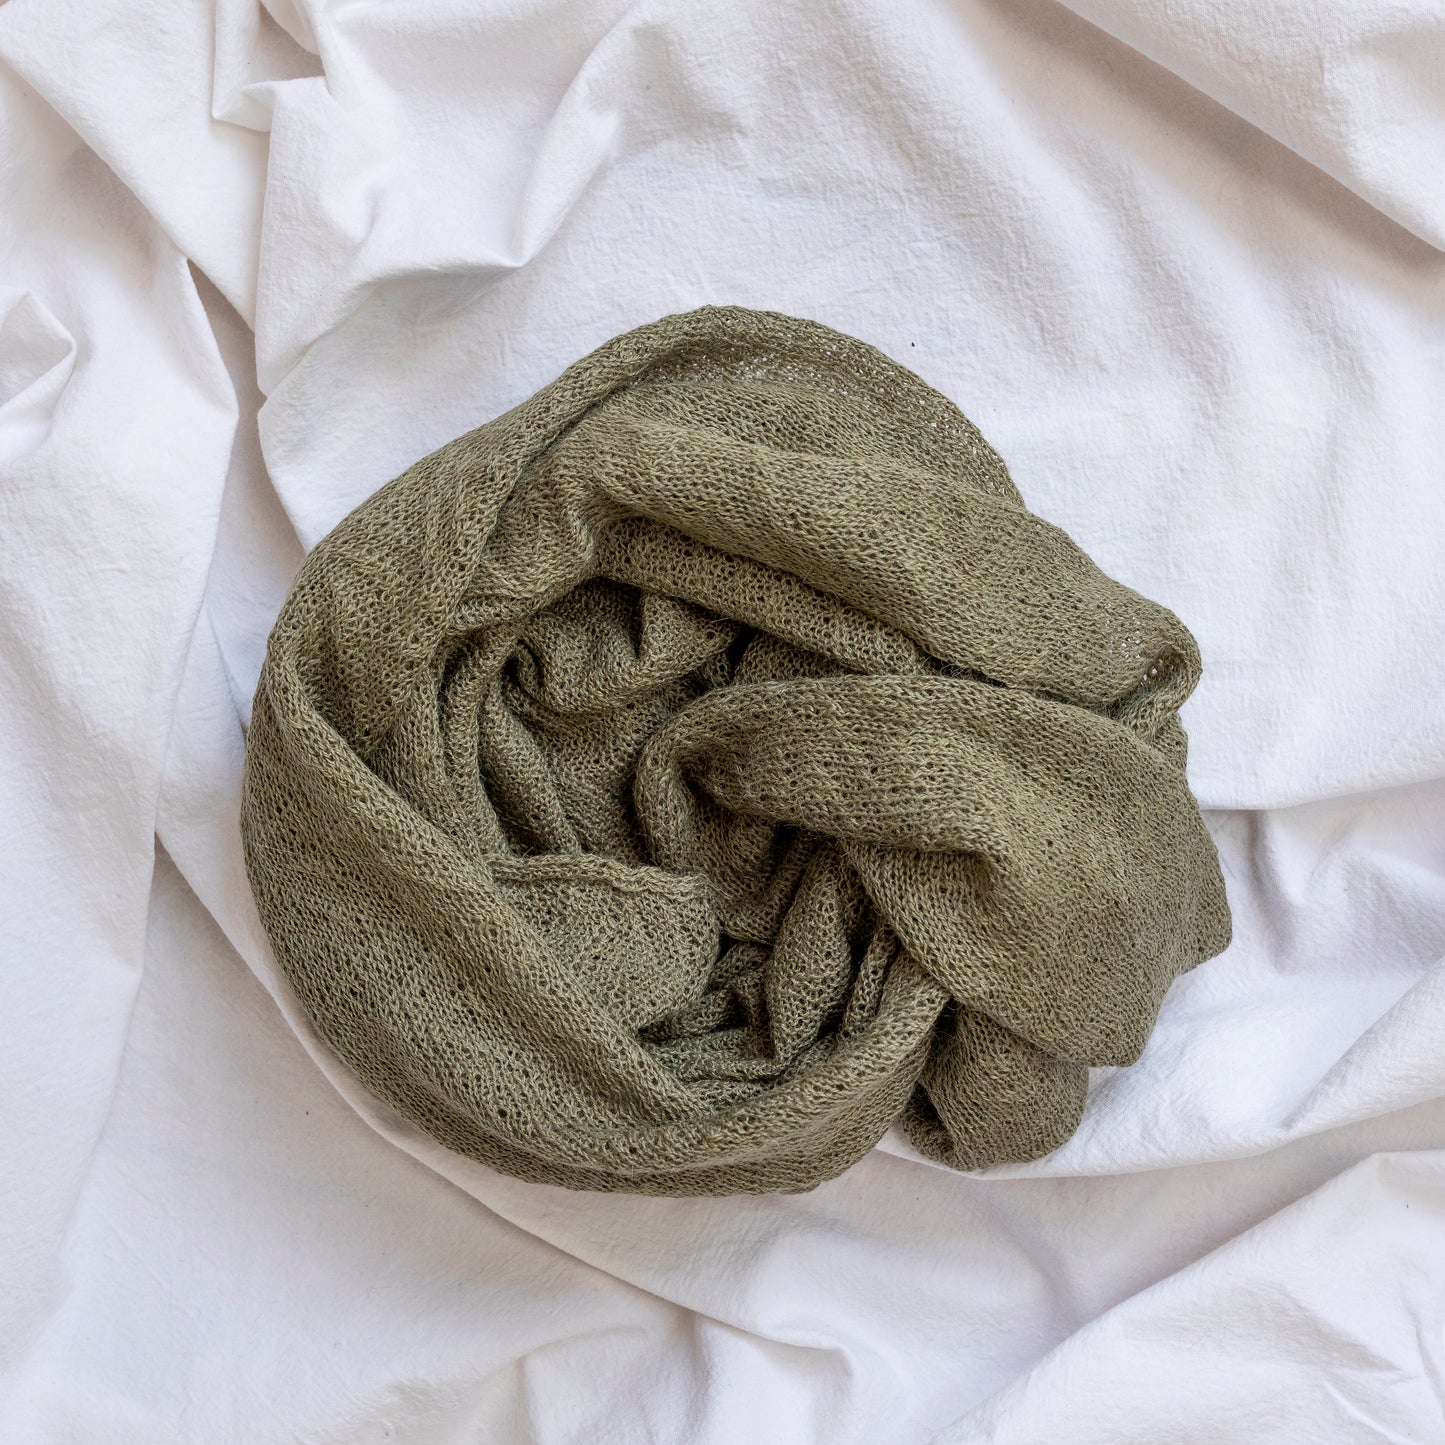 Khaki coloured lightweight and delicately woven scarf. Hand-made by artisans.